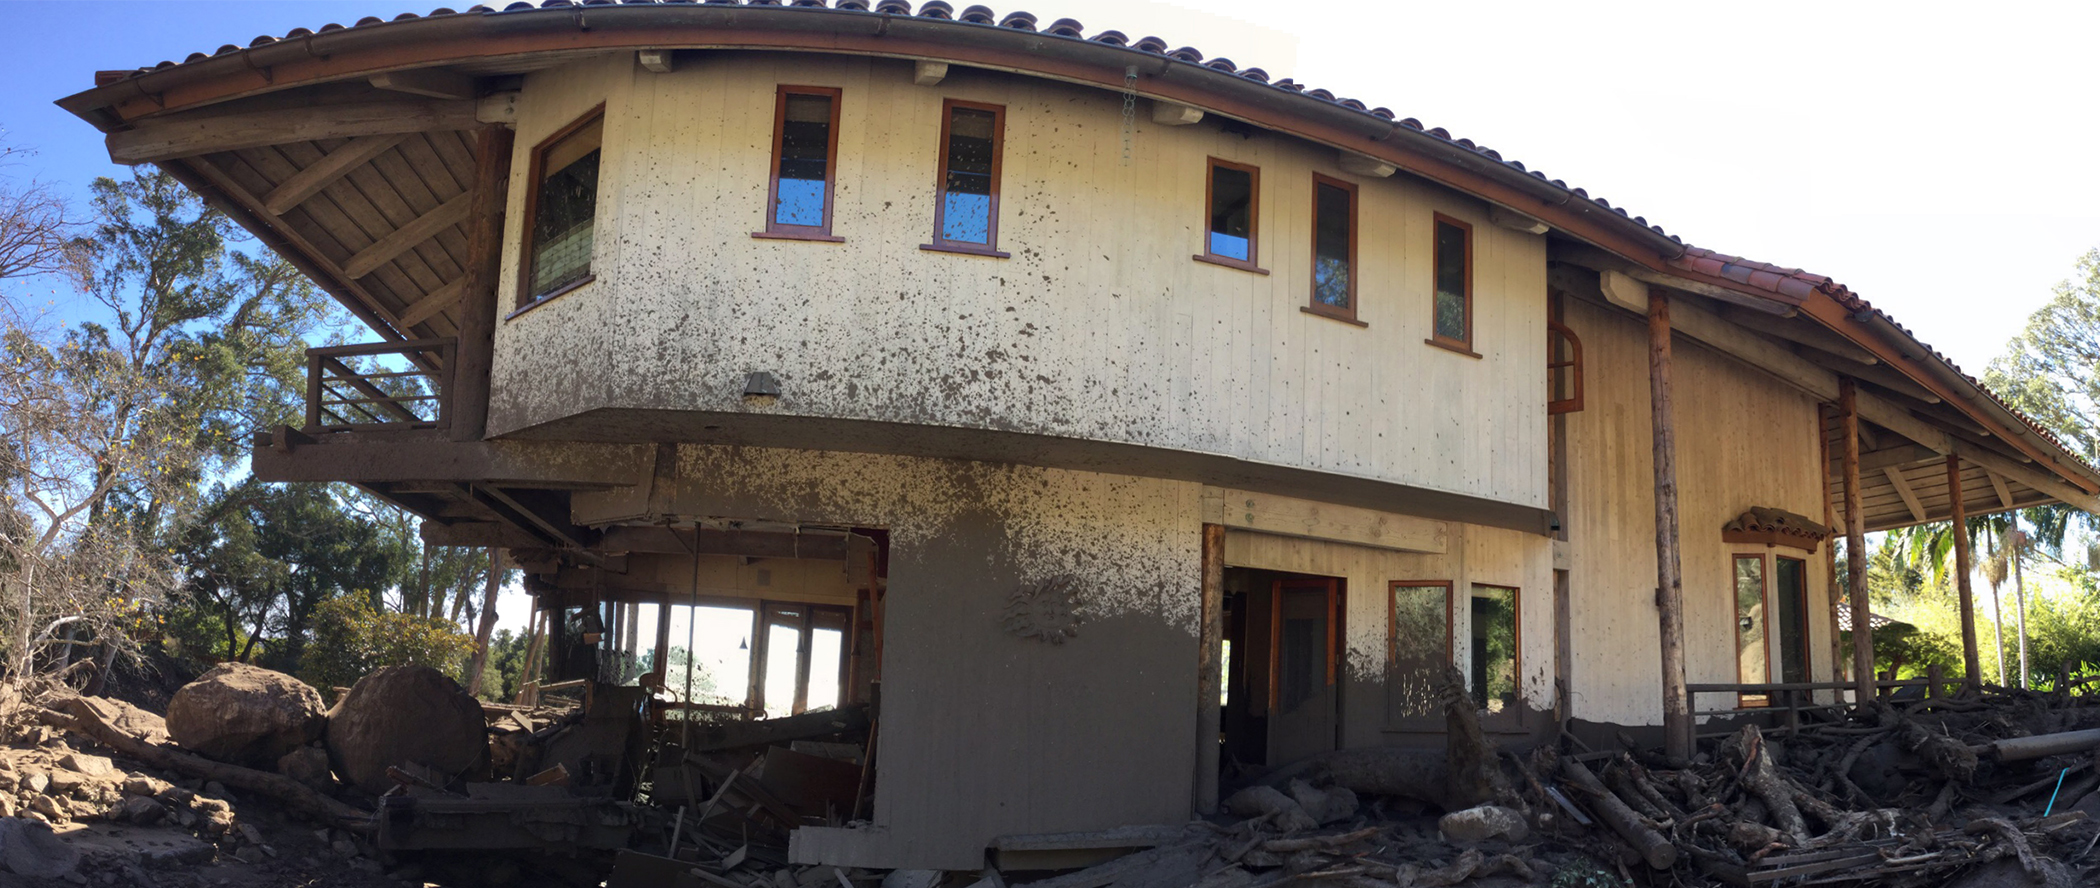 A two-story home damaged by a debris flow. The building is surrounded by displaced boulders and woody debris, and the exterior is caked with mud up to the bottom of the second floor. The caption below provides more information.